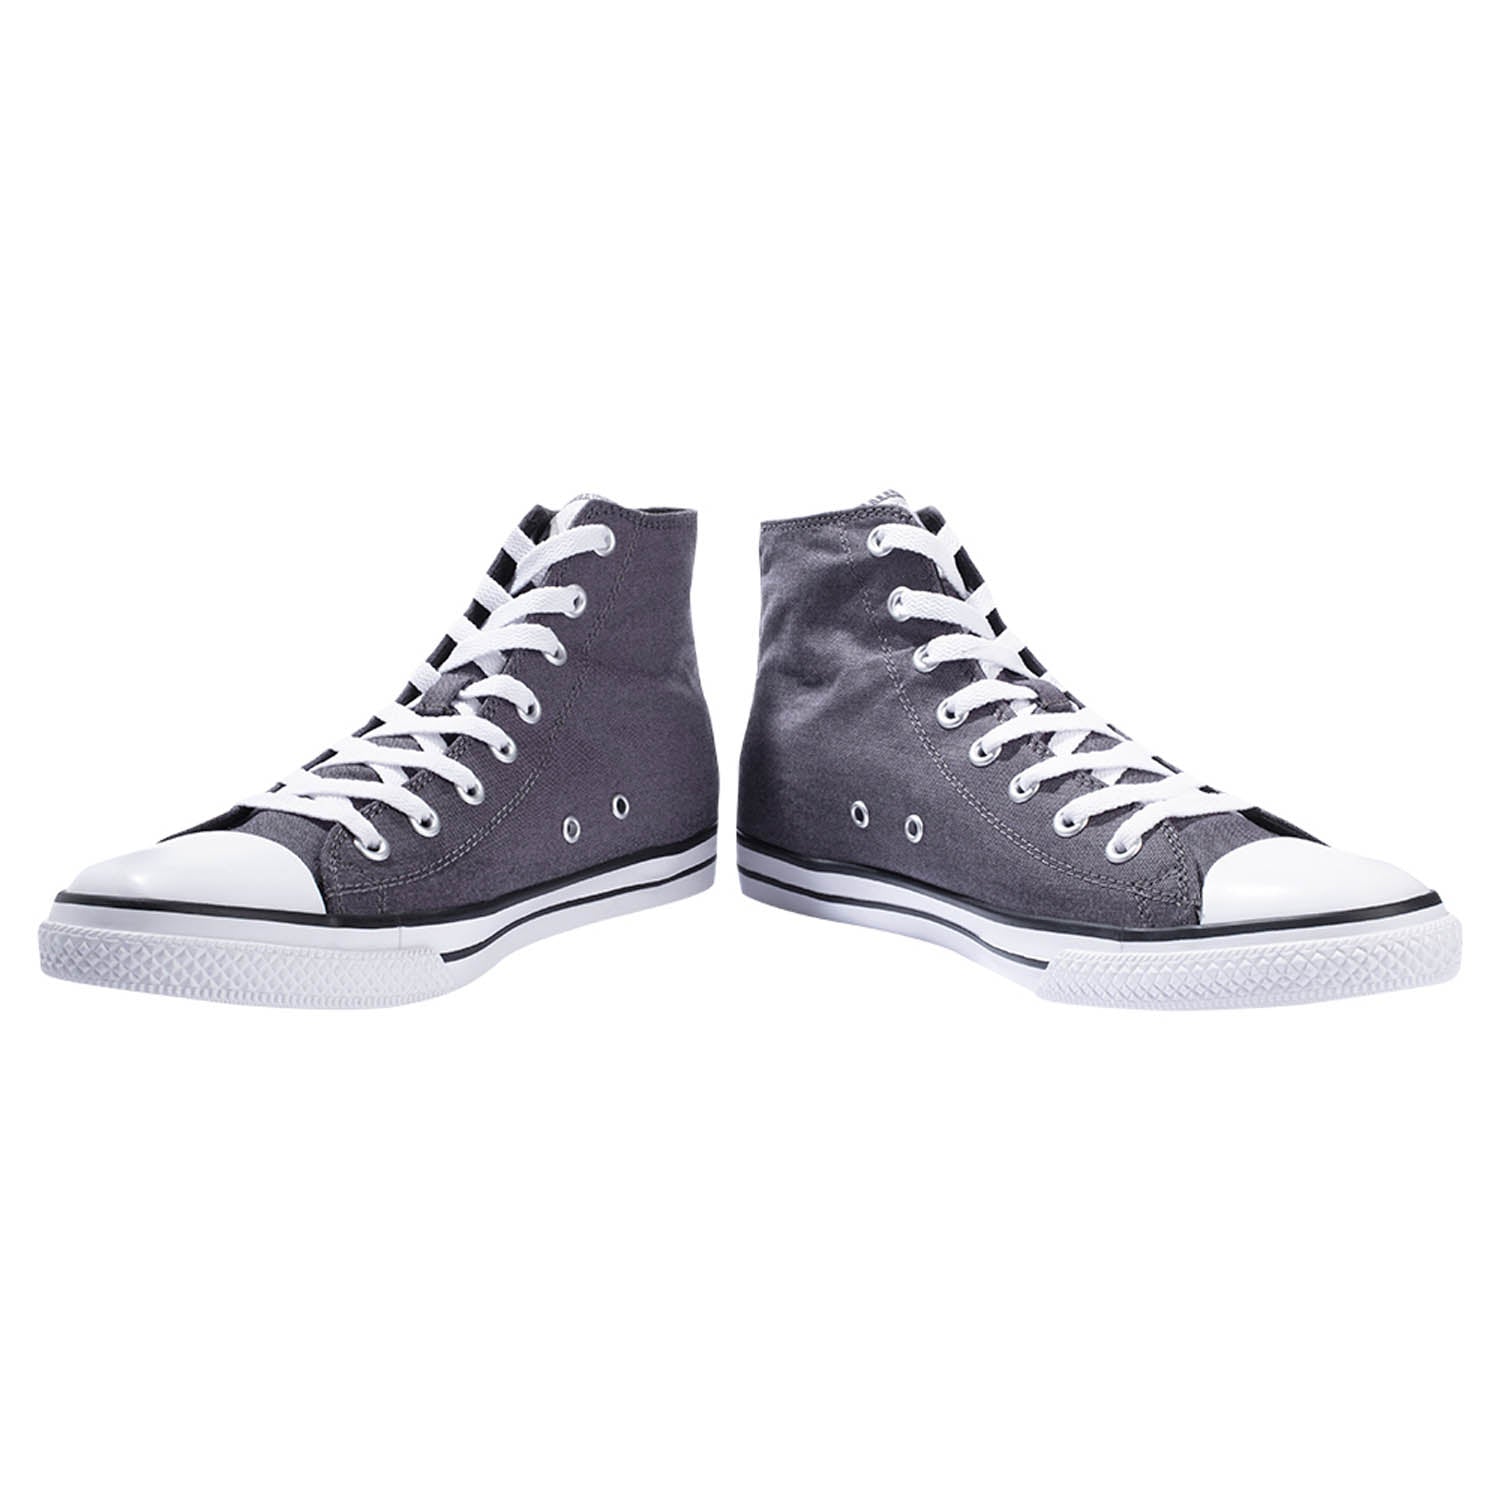 Eeken Freestyl Pro From The House Of Paragon High Tops For Men